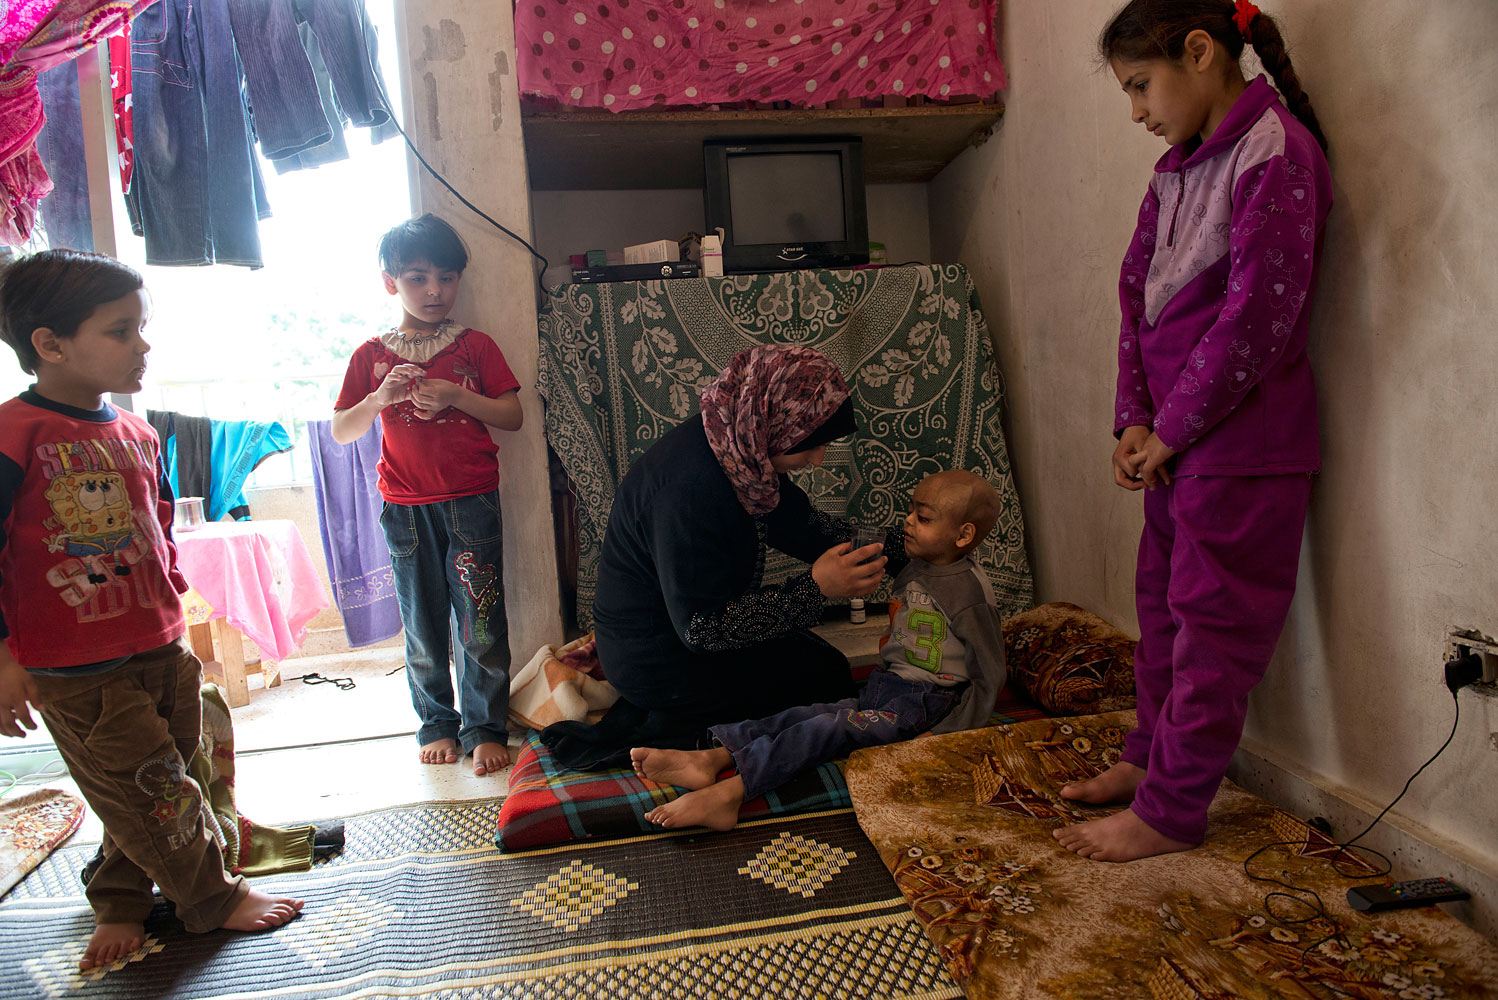 Feryal Delly, a Syrian refugee, gives water to her 4-year-old son Zacharia on March 9. Zacharia, who suffers from a brain tumor, lives with his family in a rented apartment in Halt, north of Beirut. 